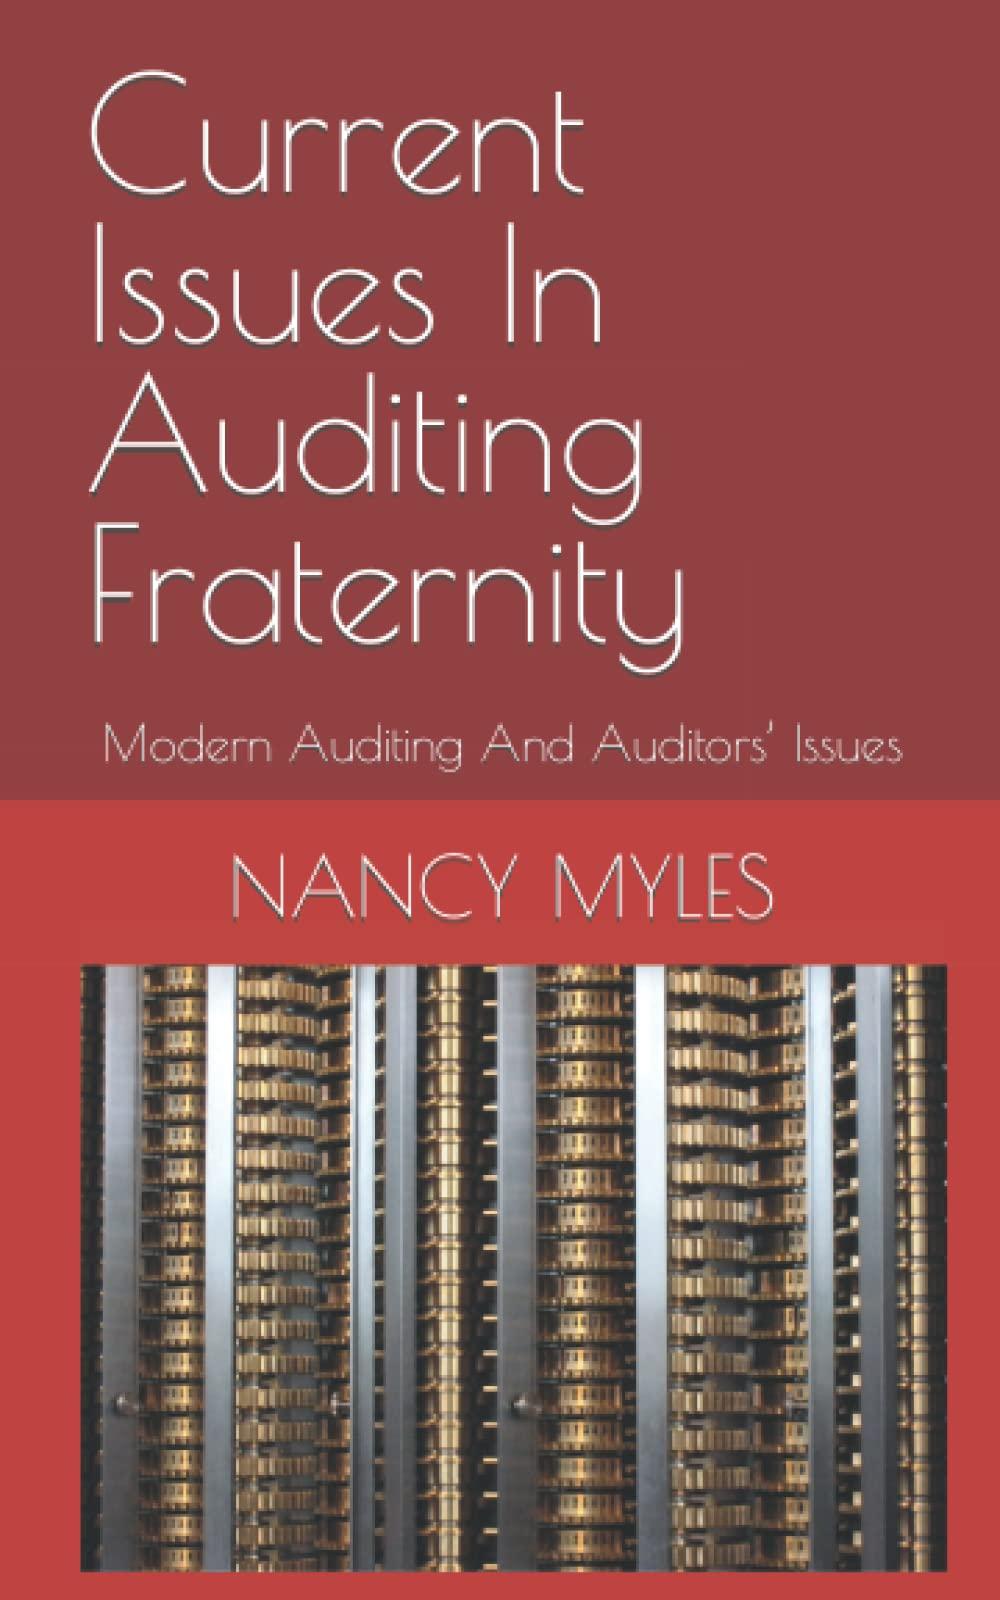 current issues in auditing fraternity modern auditing and auditors issues 1st edition nancy myle b0bcsdpymd,